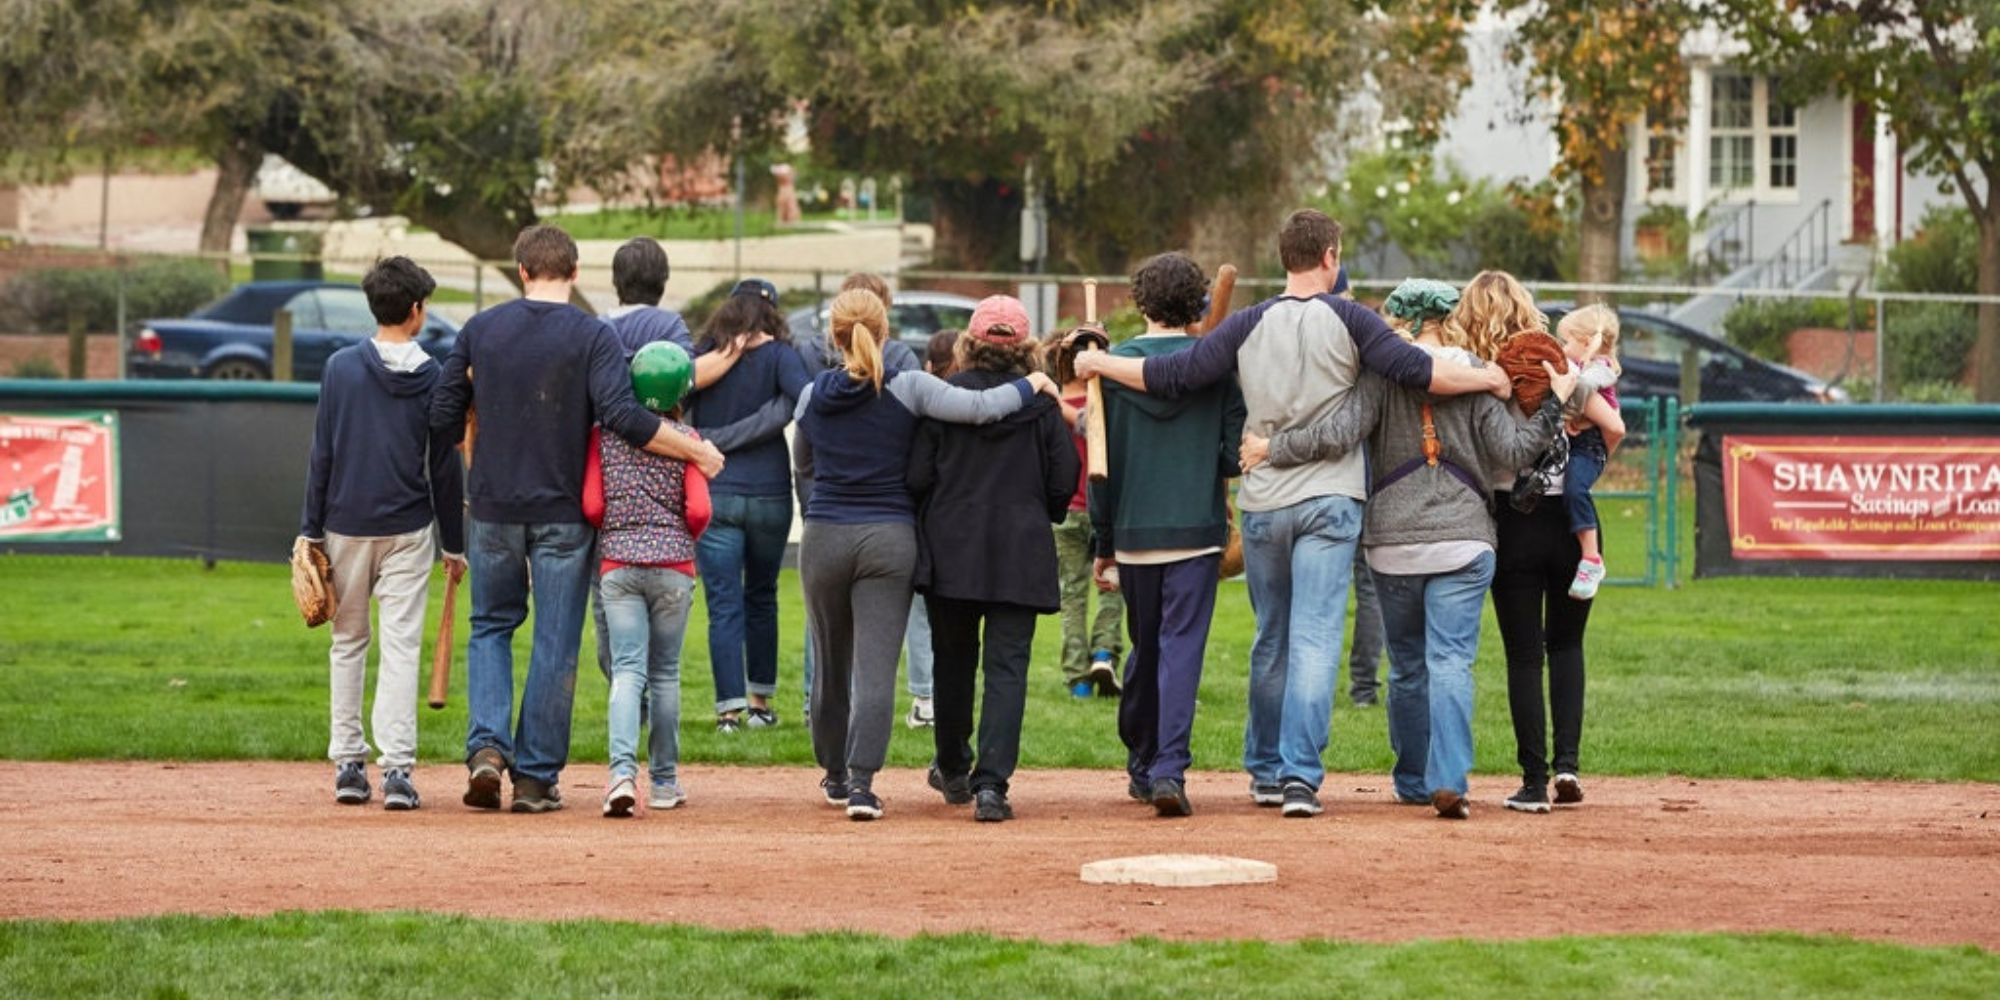 The family baseball game in the parenthood finale